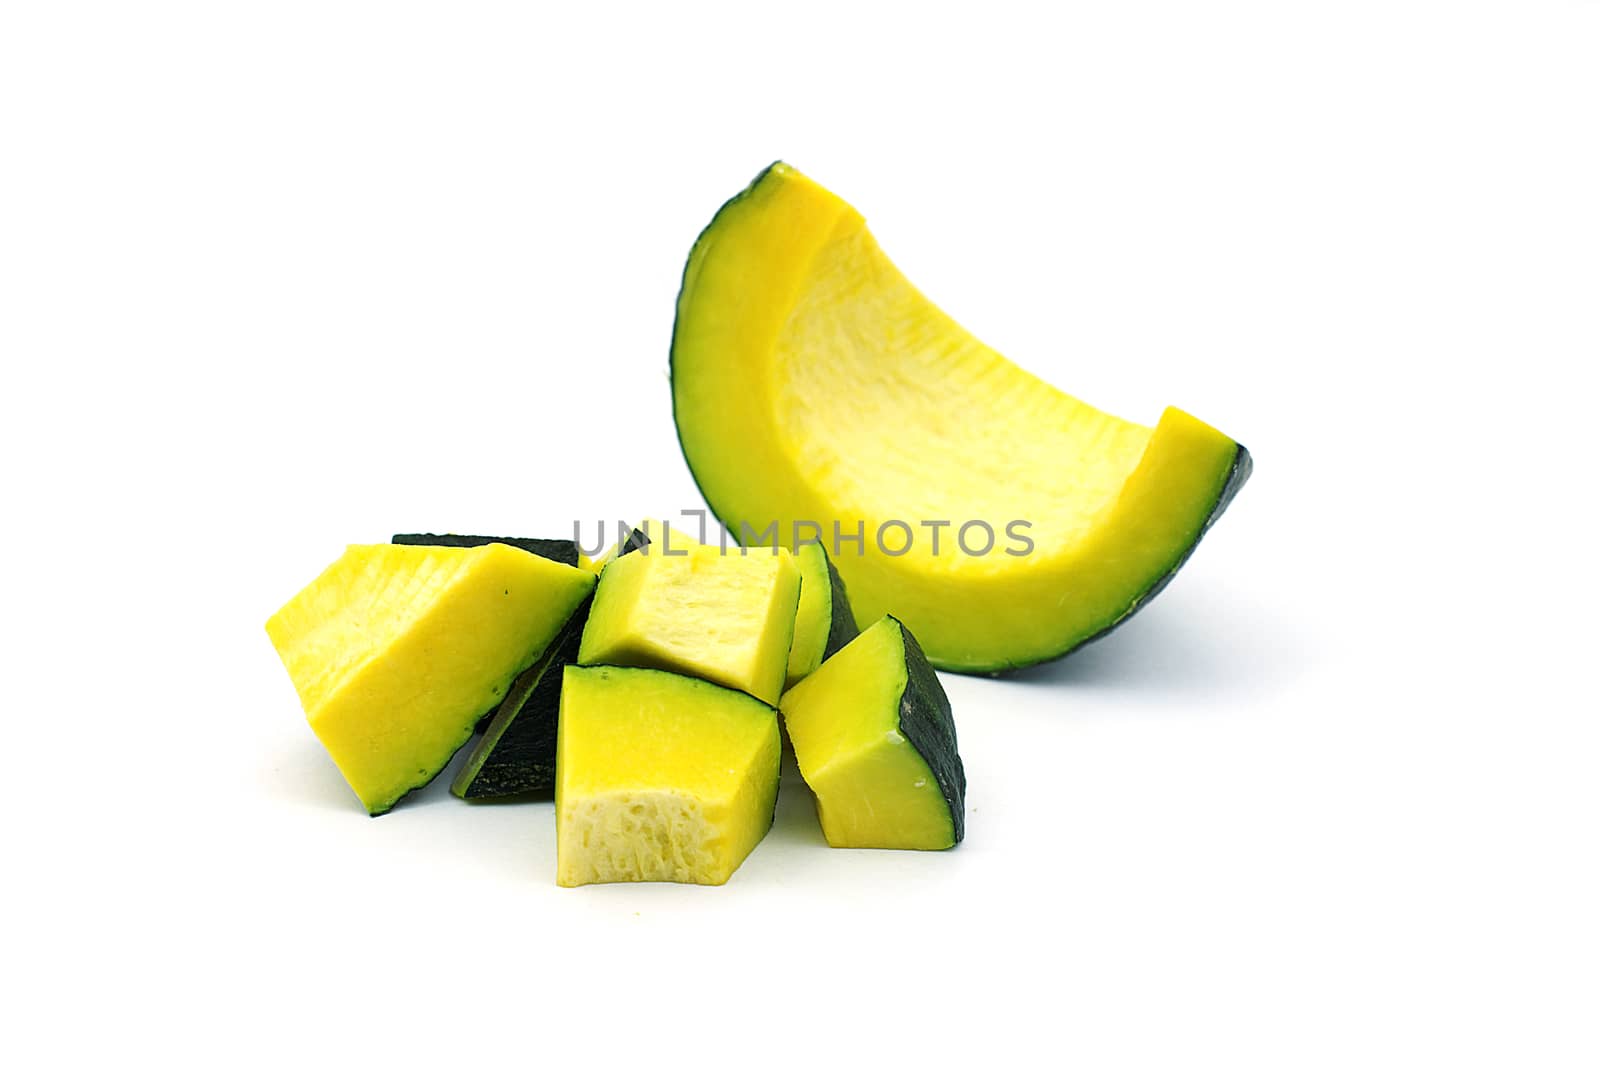 Sliced raw yellow pumpkin on white background. Sliced yellow pumpkin for use as cooking ingredients